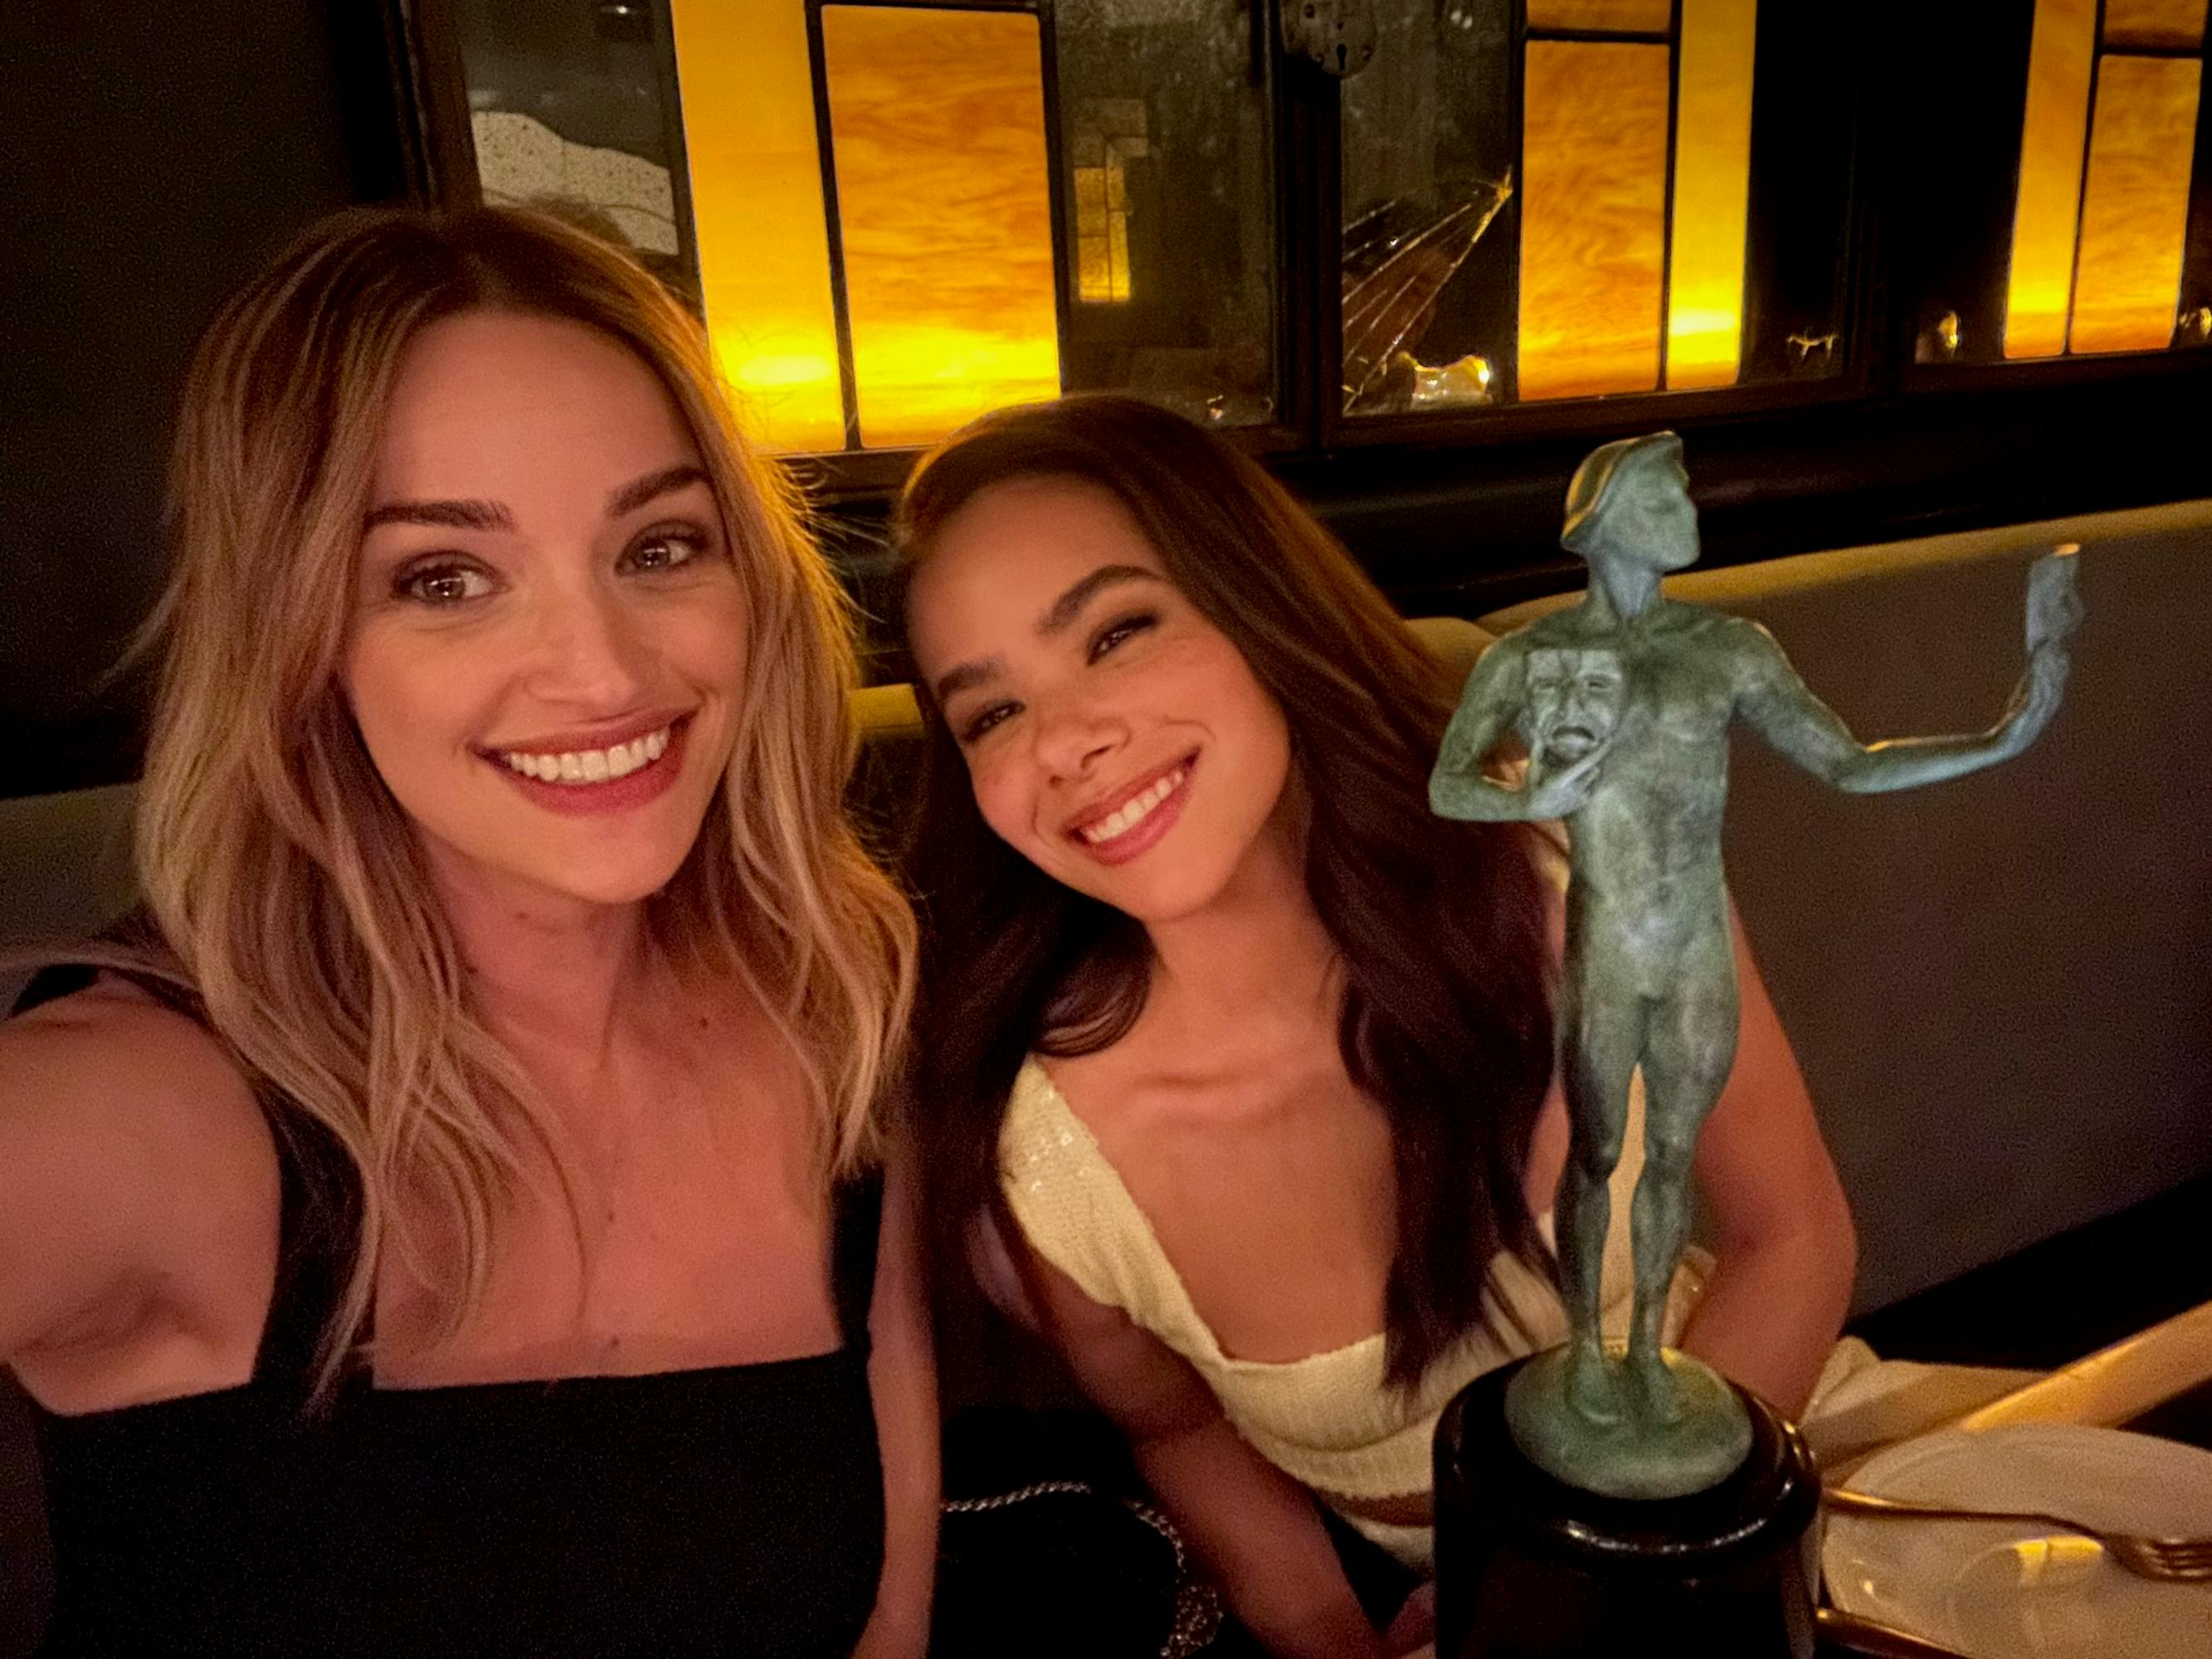  Brianne Howey and Antonia Gentry pose next to a small green statue in this cute selfie.